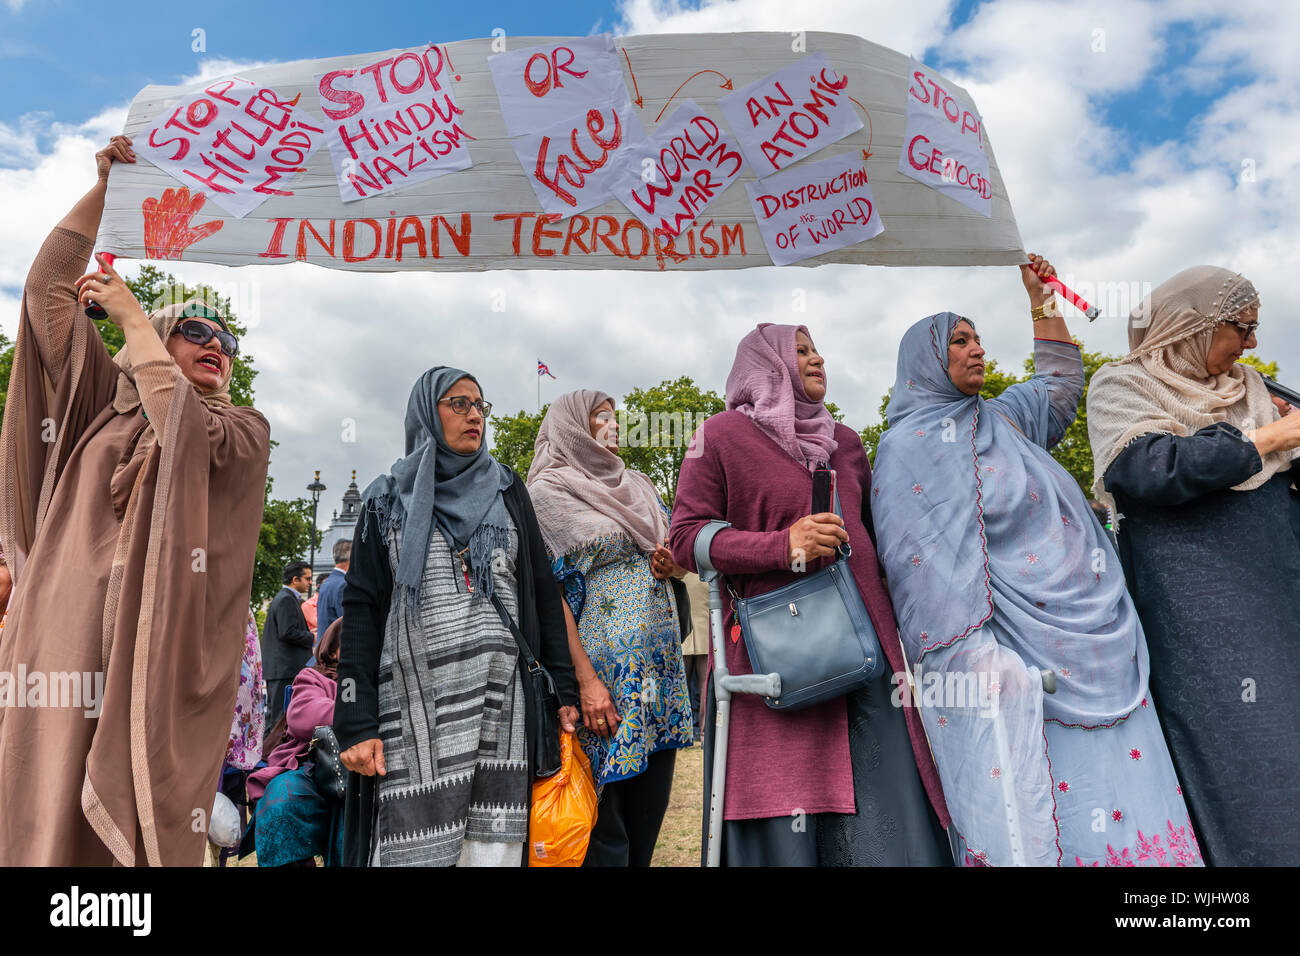 Westminster, London, England. 3rd September, 2019. Protesters march on Indian High Commission in London over Modi’s Kashmir ‘lockdown’. Large crowds marched in London from Parliament Square to the Indian High Commission in support of freedom for Kashmiris as an Indian-imposed lockdown of Kashmir entered its 30th day. Terry Mathews/Alamy Live News. Stock Photo